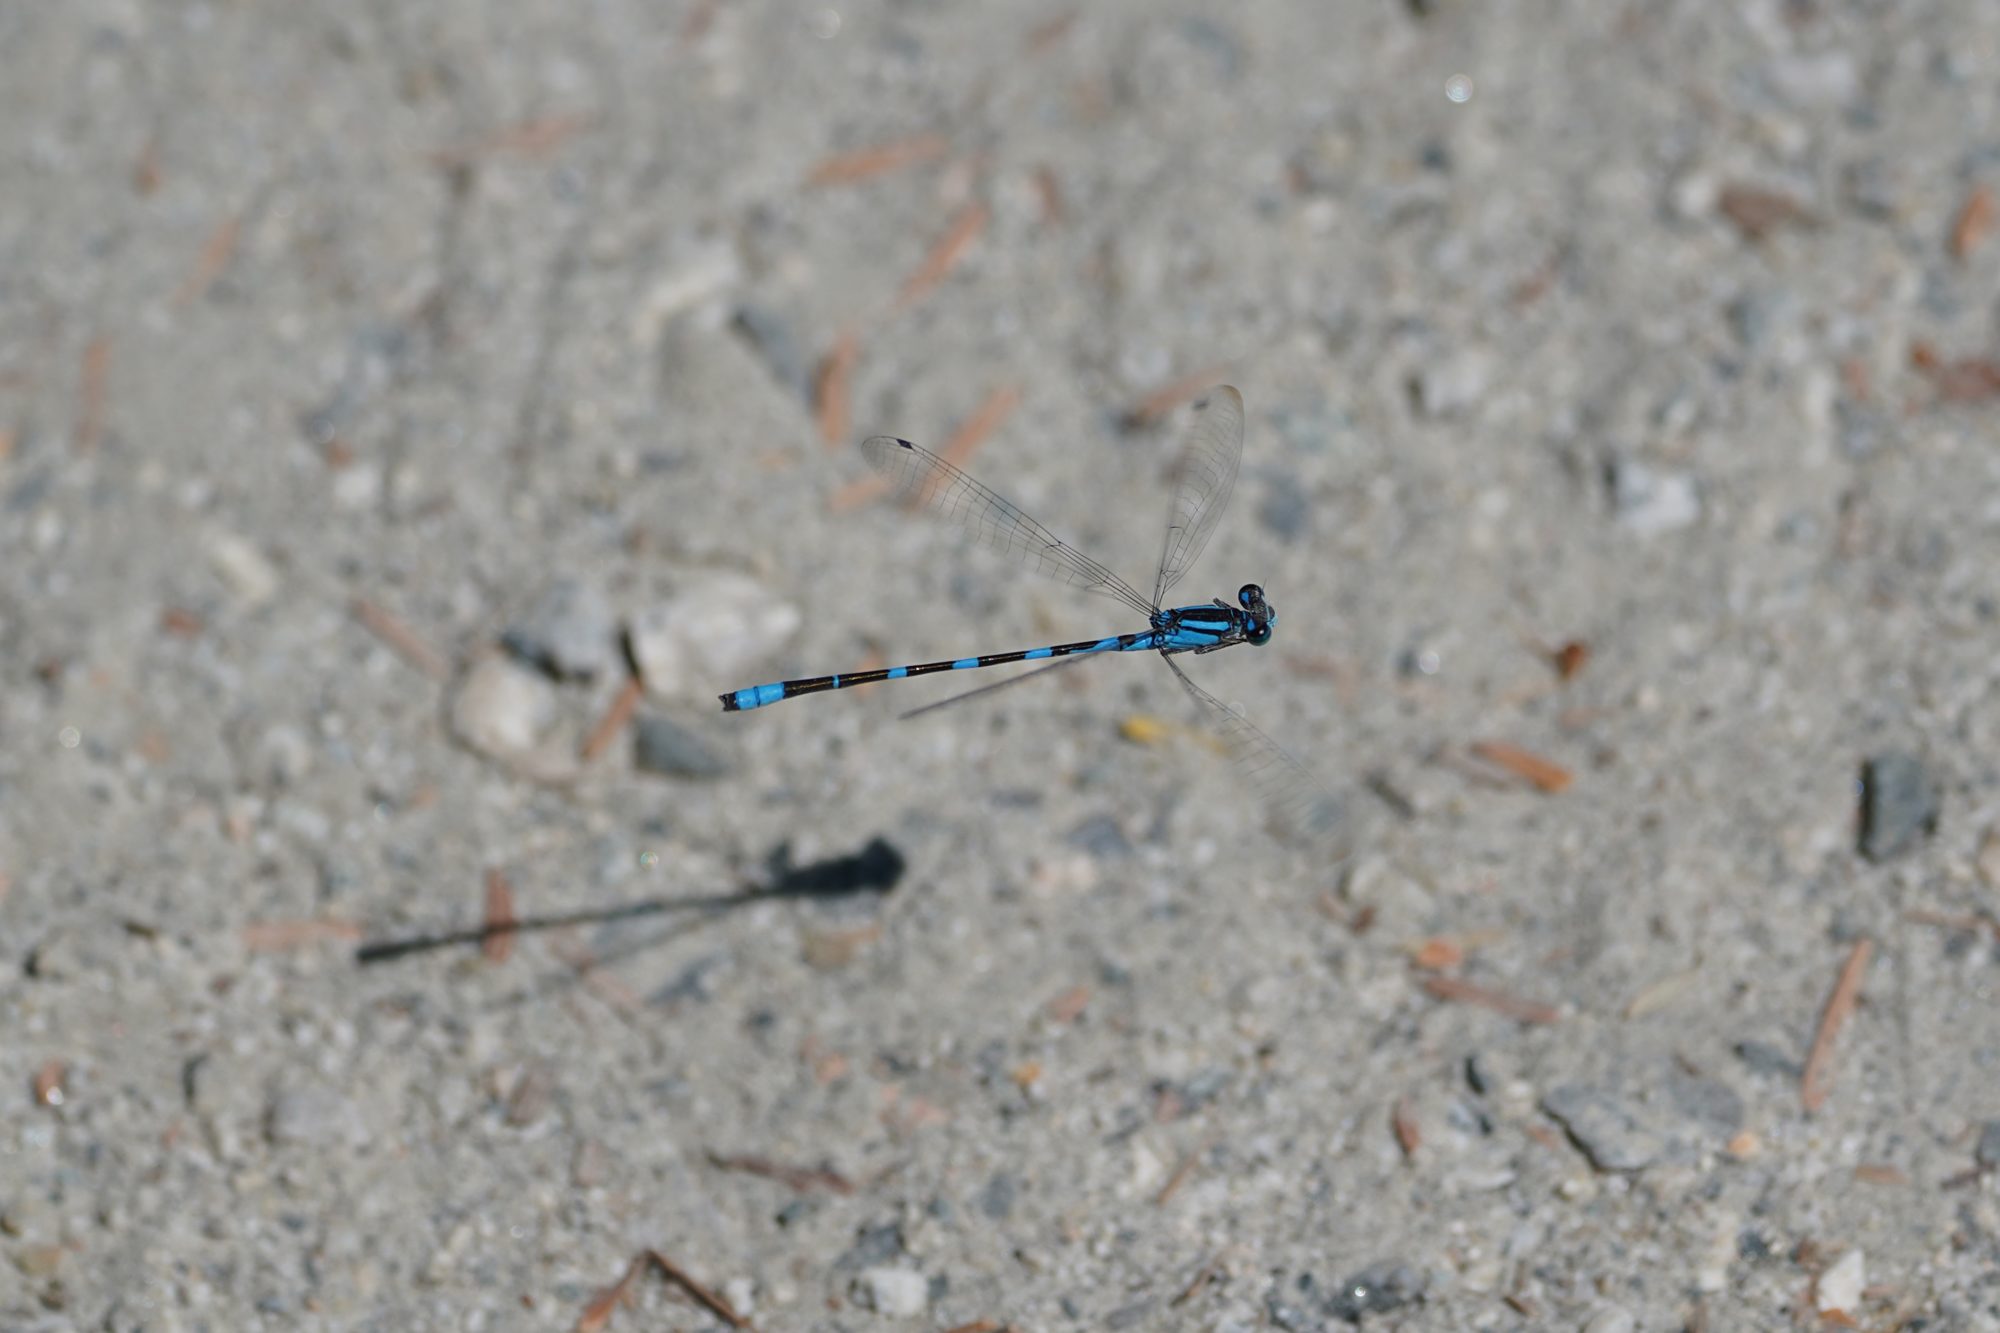 A slim blue and black damselfly hovering just above the gravelly trail